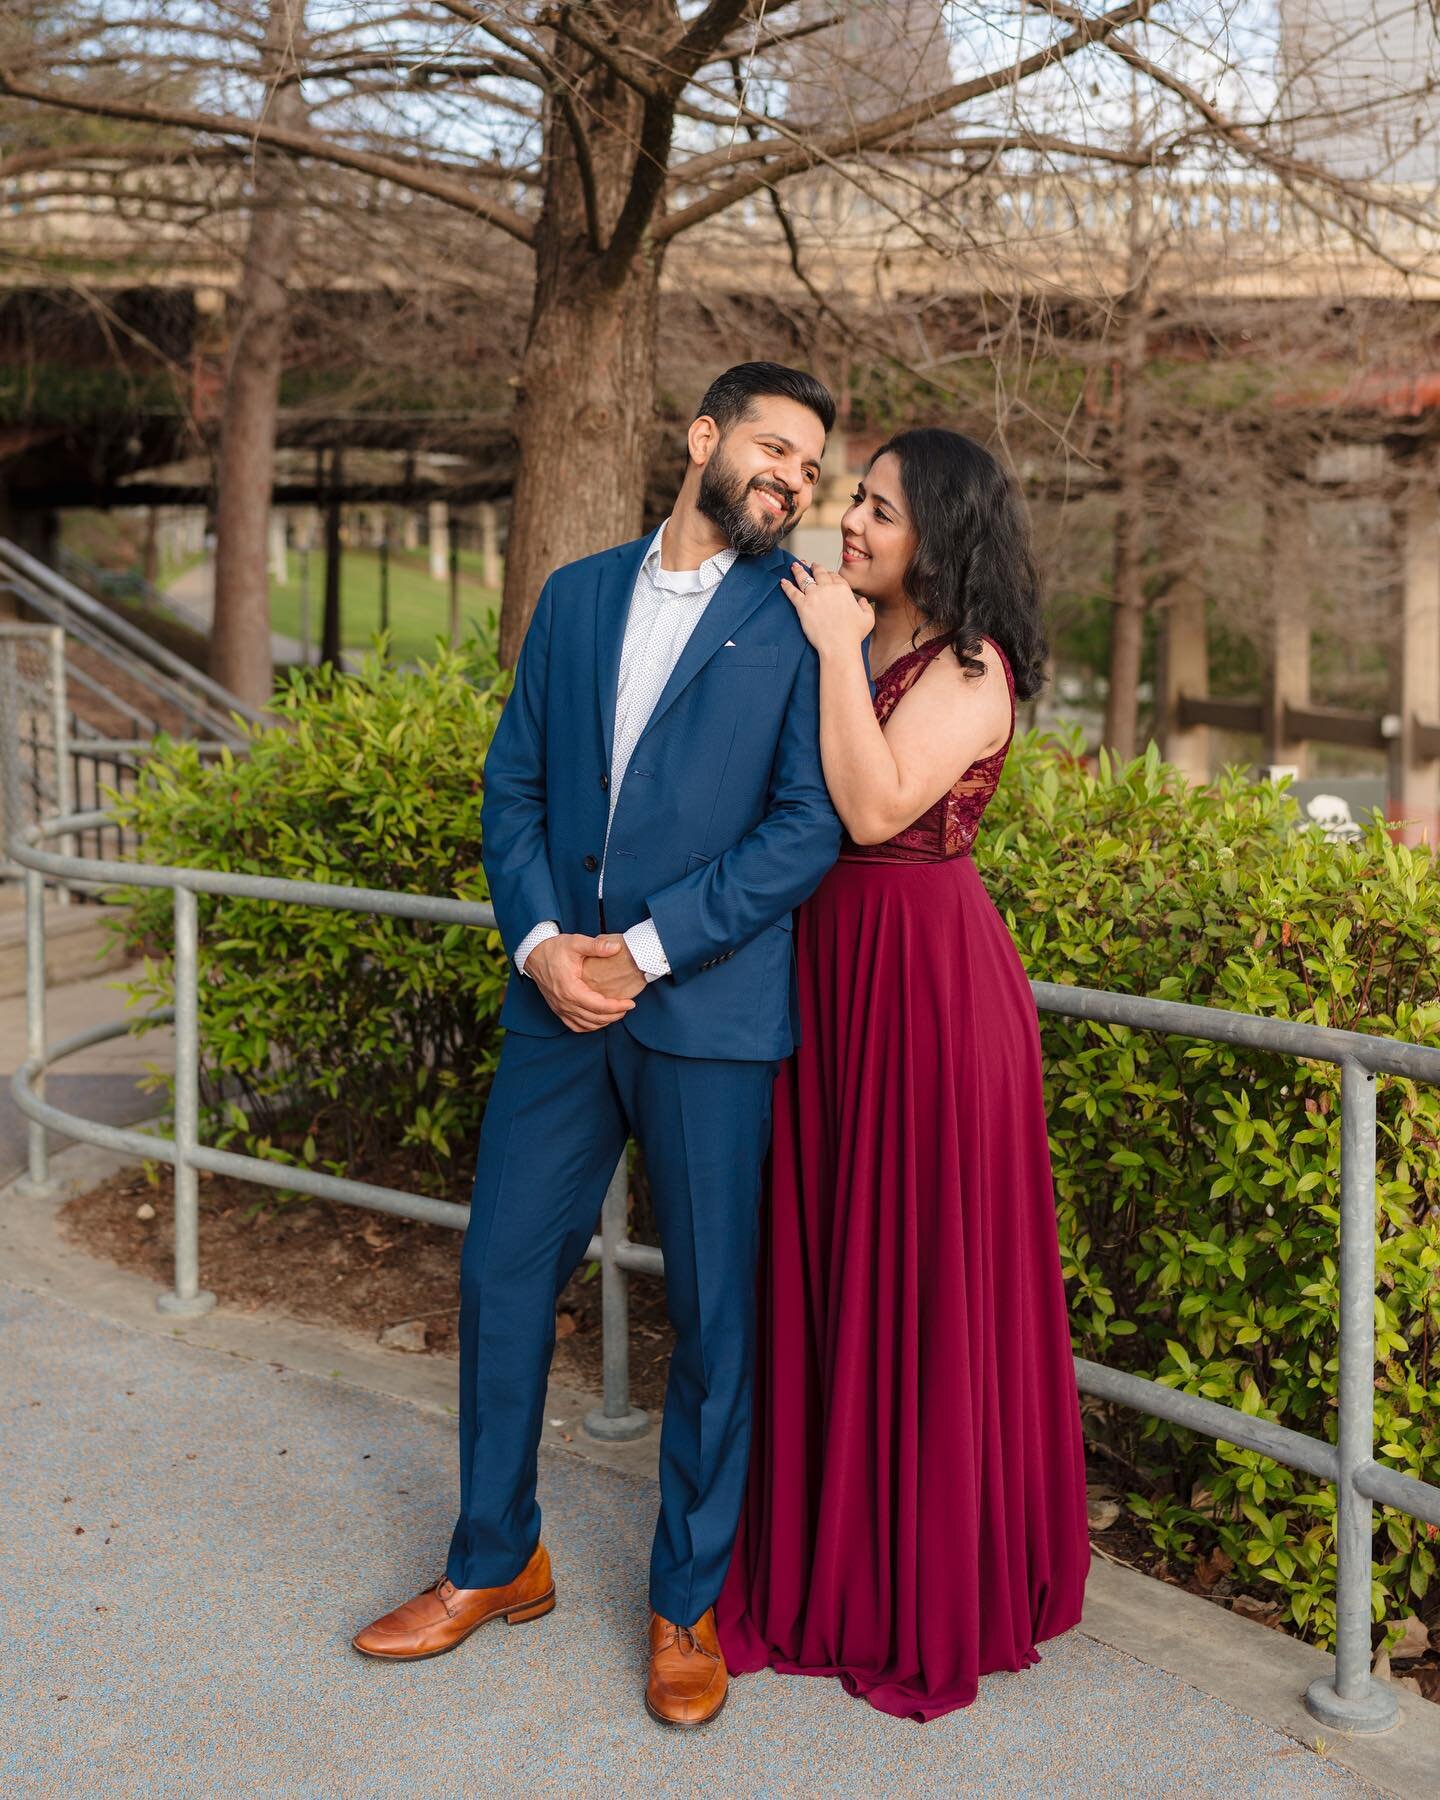 if y&rsquo;all haven&rsquo;t seen @kaetlinbrown latest post go check it out now :) the vibes are so good !!

#houstonphotographer #houstonweddingphotographer #houstonseniorphotographer